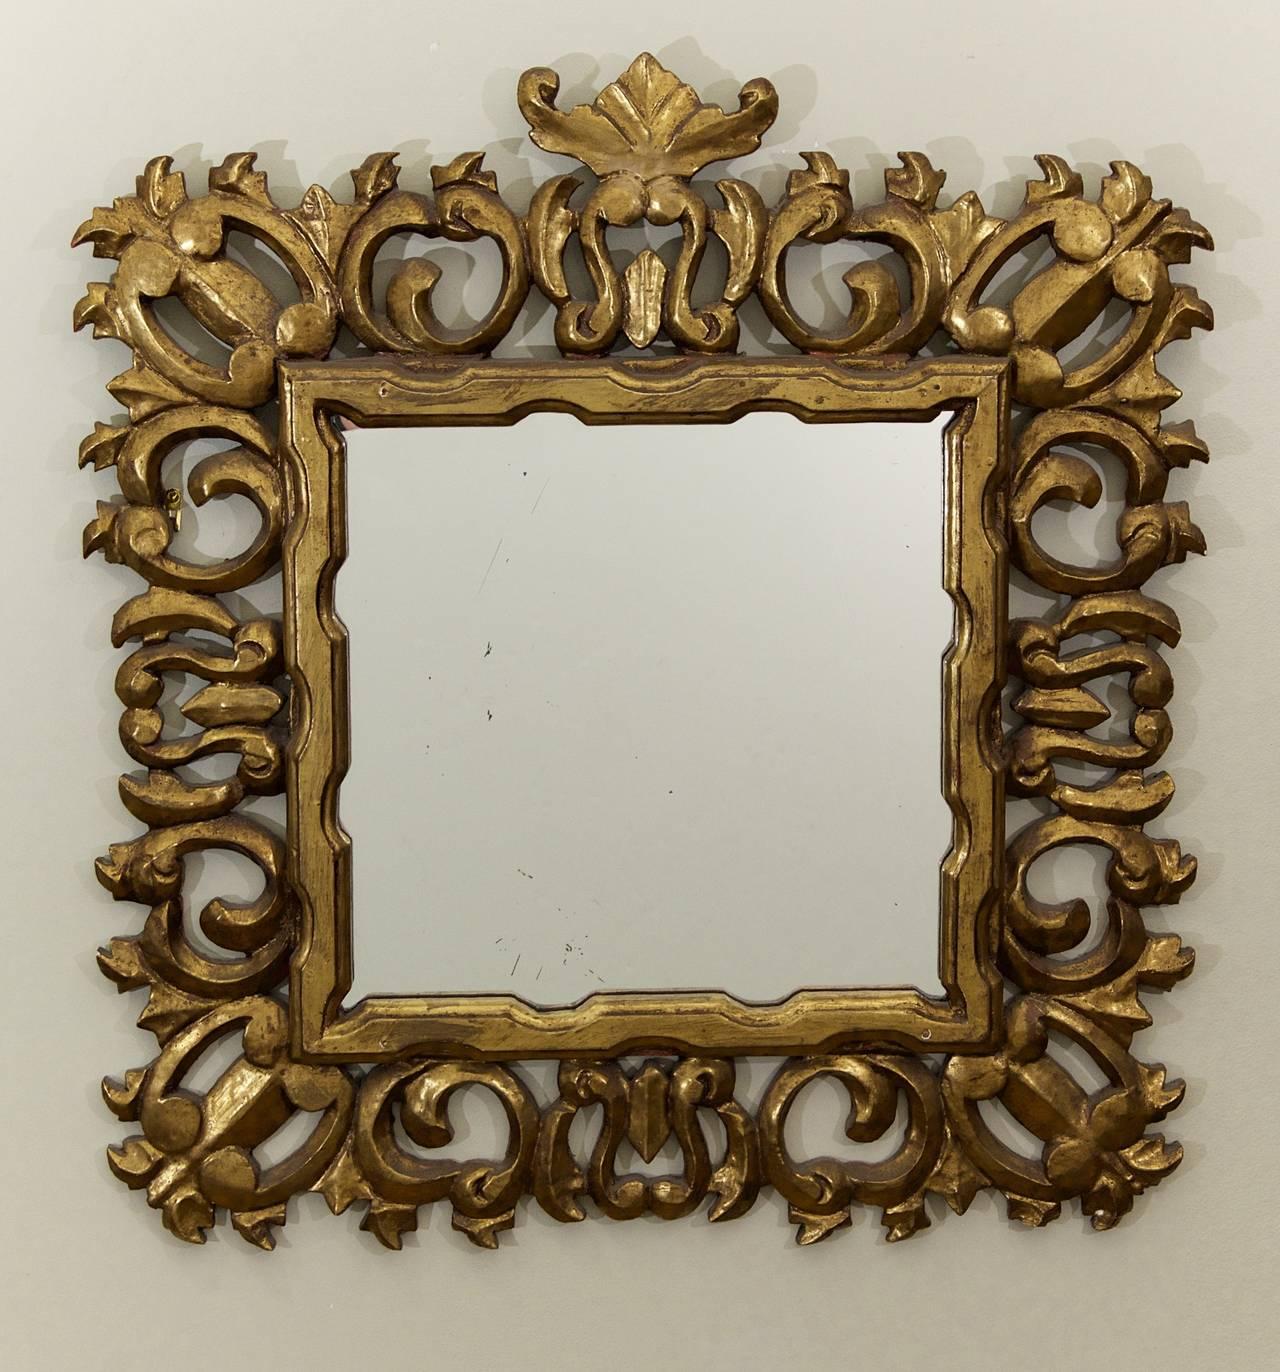 Excellent Hollywood Regency mirror, the overscale carved frame in gessoed giltwood. Dramatic and well-formed.